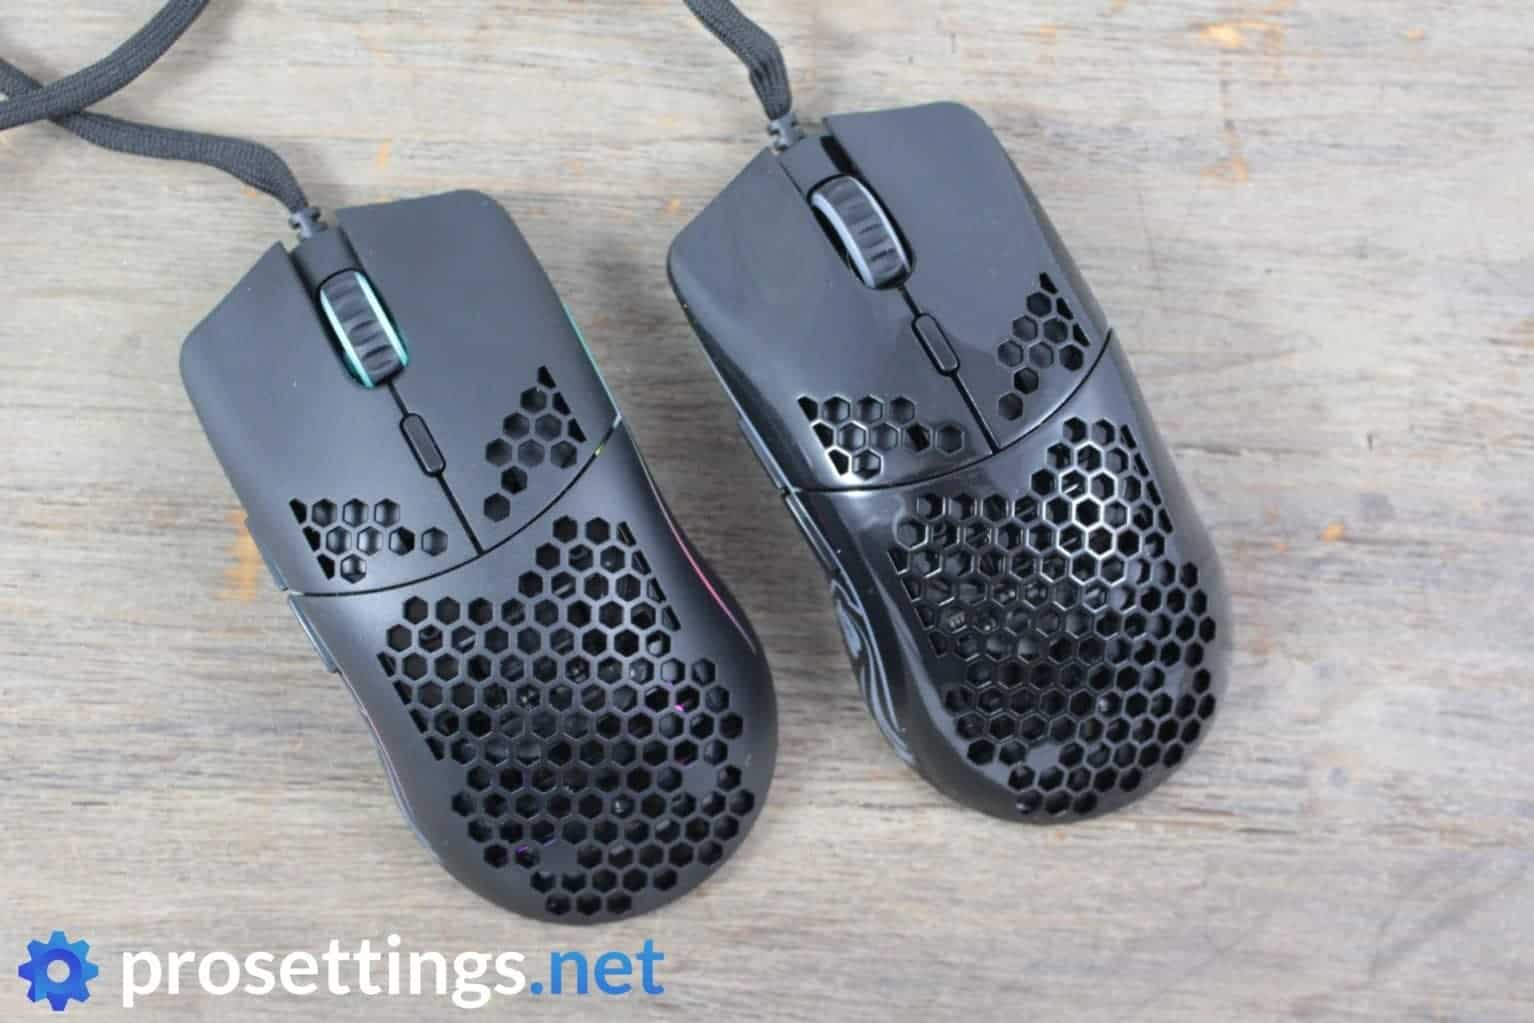 Glorious Model O mouse Review